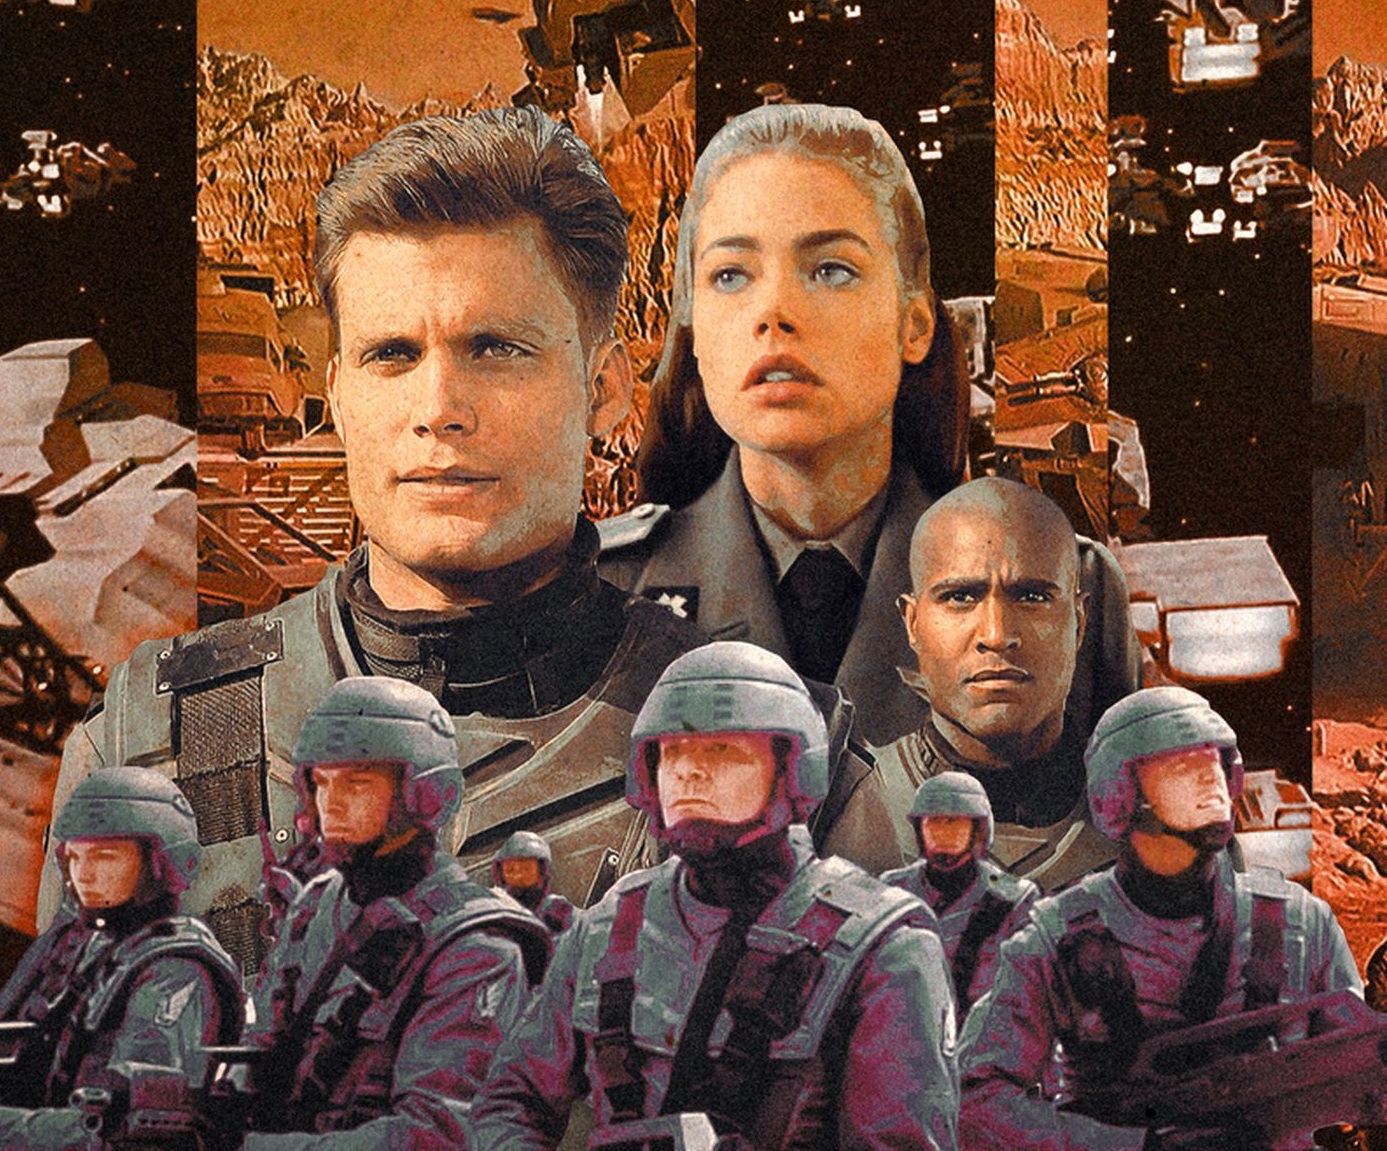 Did you know in STARSHIP TROOPERS#starshiptroopers #moviefacts